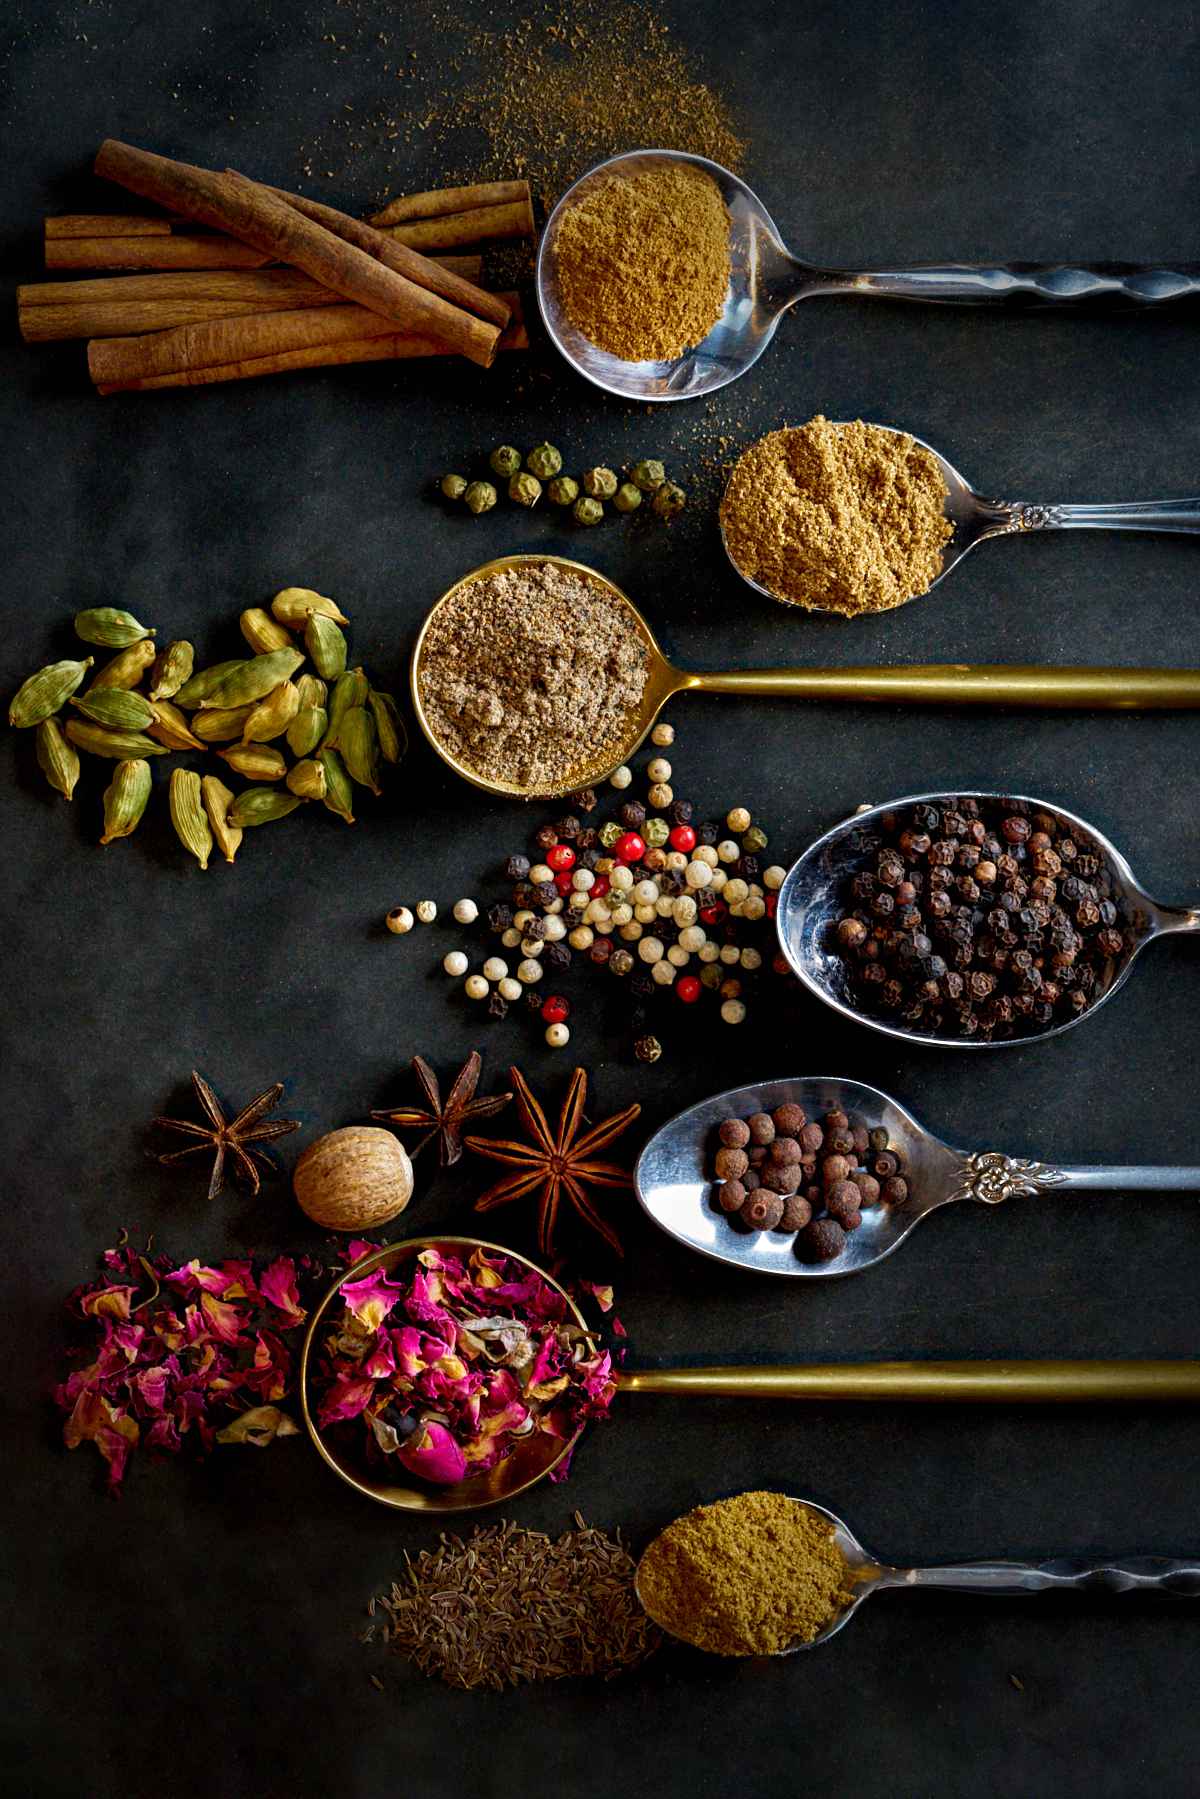 Ground and whole spices on and around spoons.